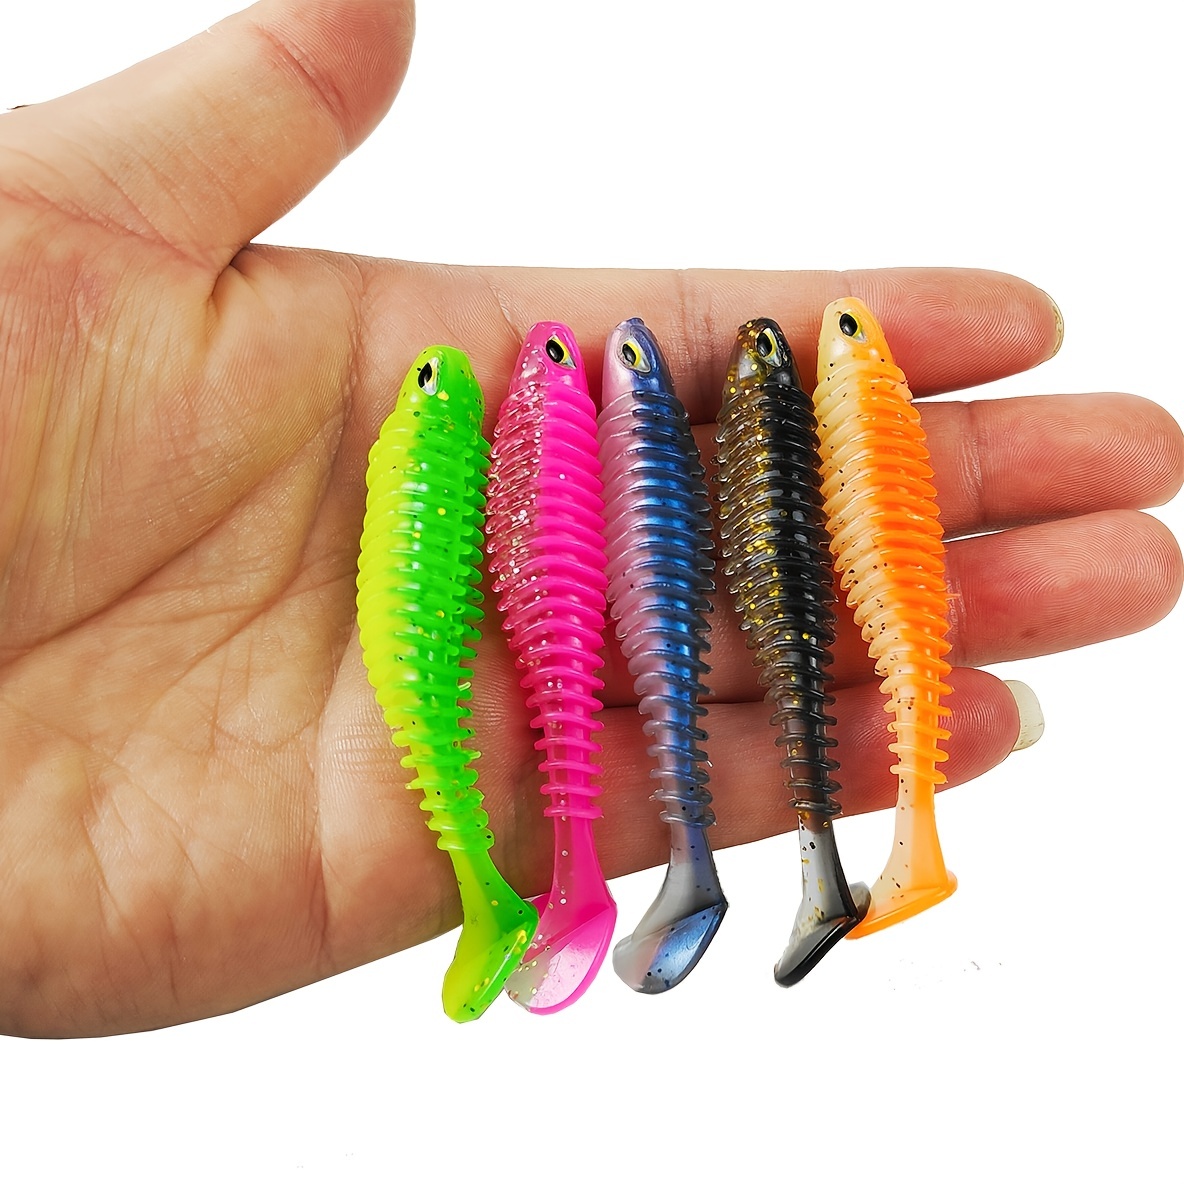 30/40pcs 2.56in/3.15in Artificial Plastic Soft Fishing Lures, 6.5cm/8cm  Bionic Paddle Tail Ribbed Swimbaits Lure For Bass Trout Walleye Crappie